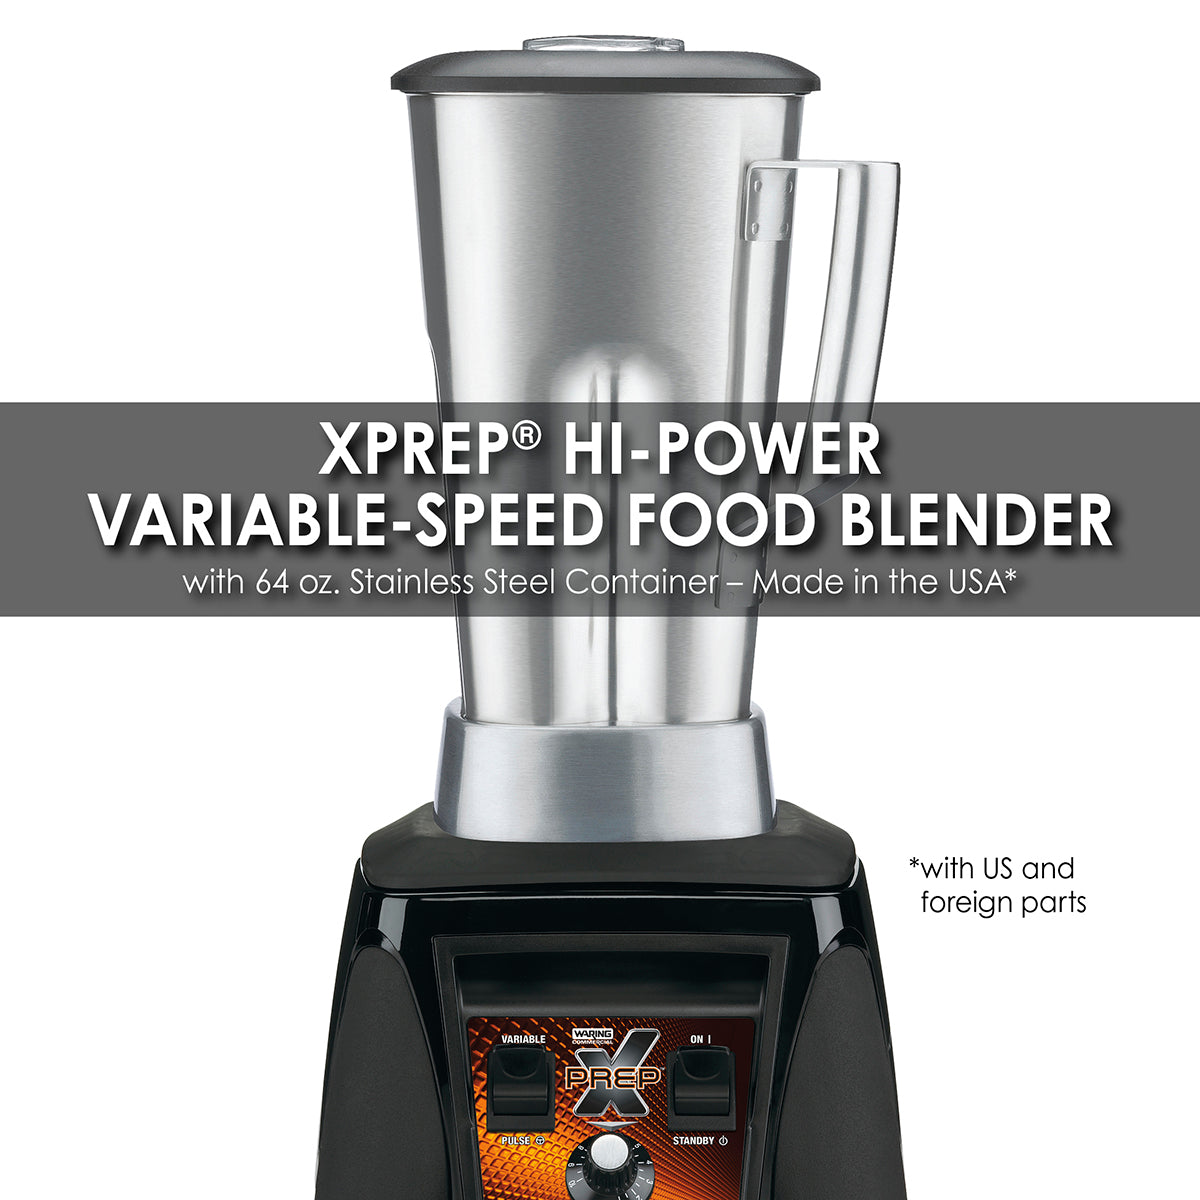 Waring MX1200XTS 3.5 HP Blender w/ Variable Speed Dial Controls & 64 oz. Stainless Steel Container